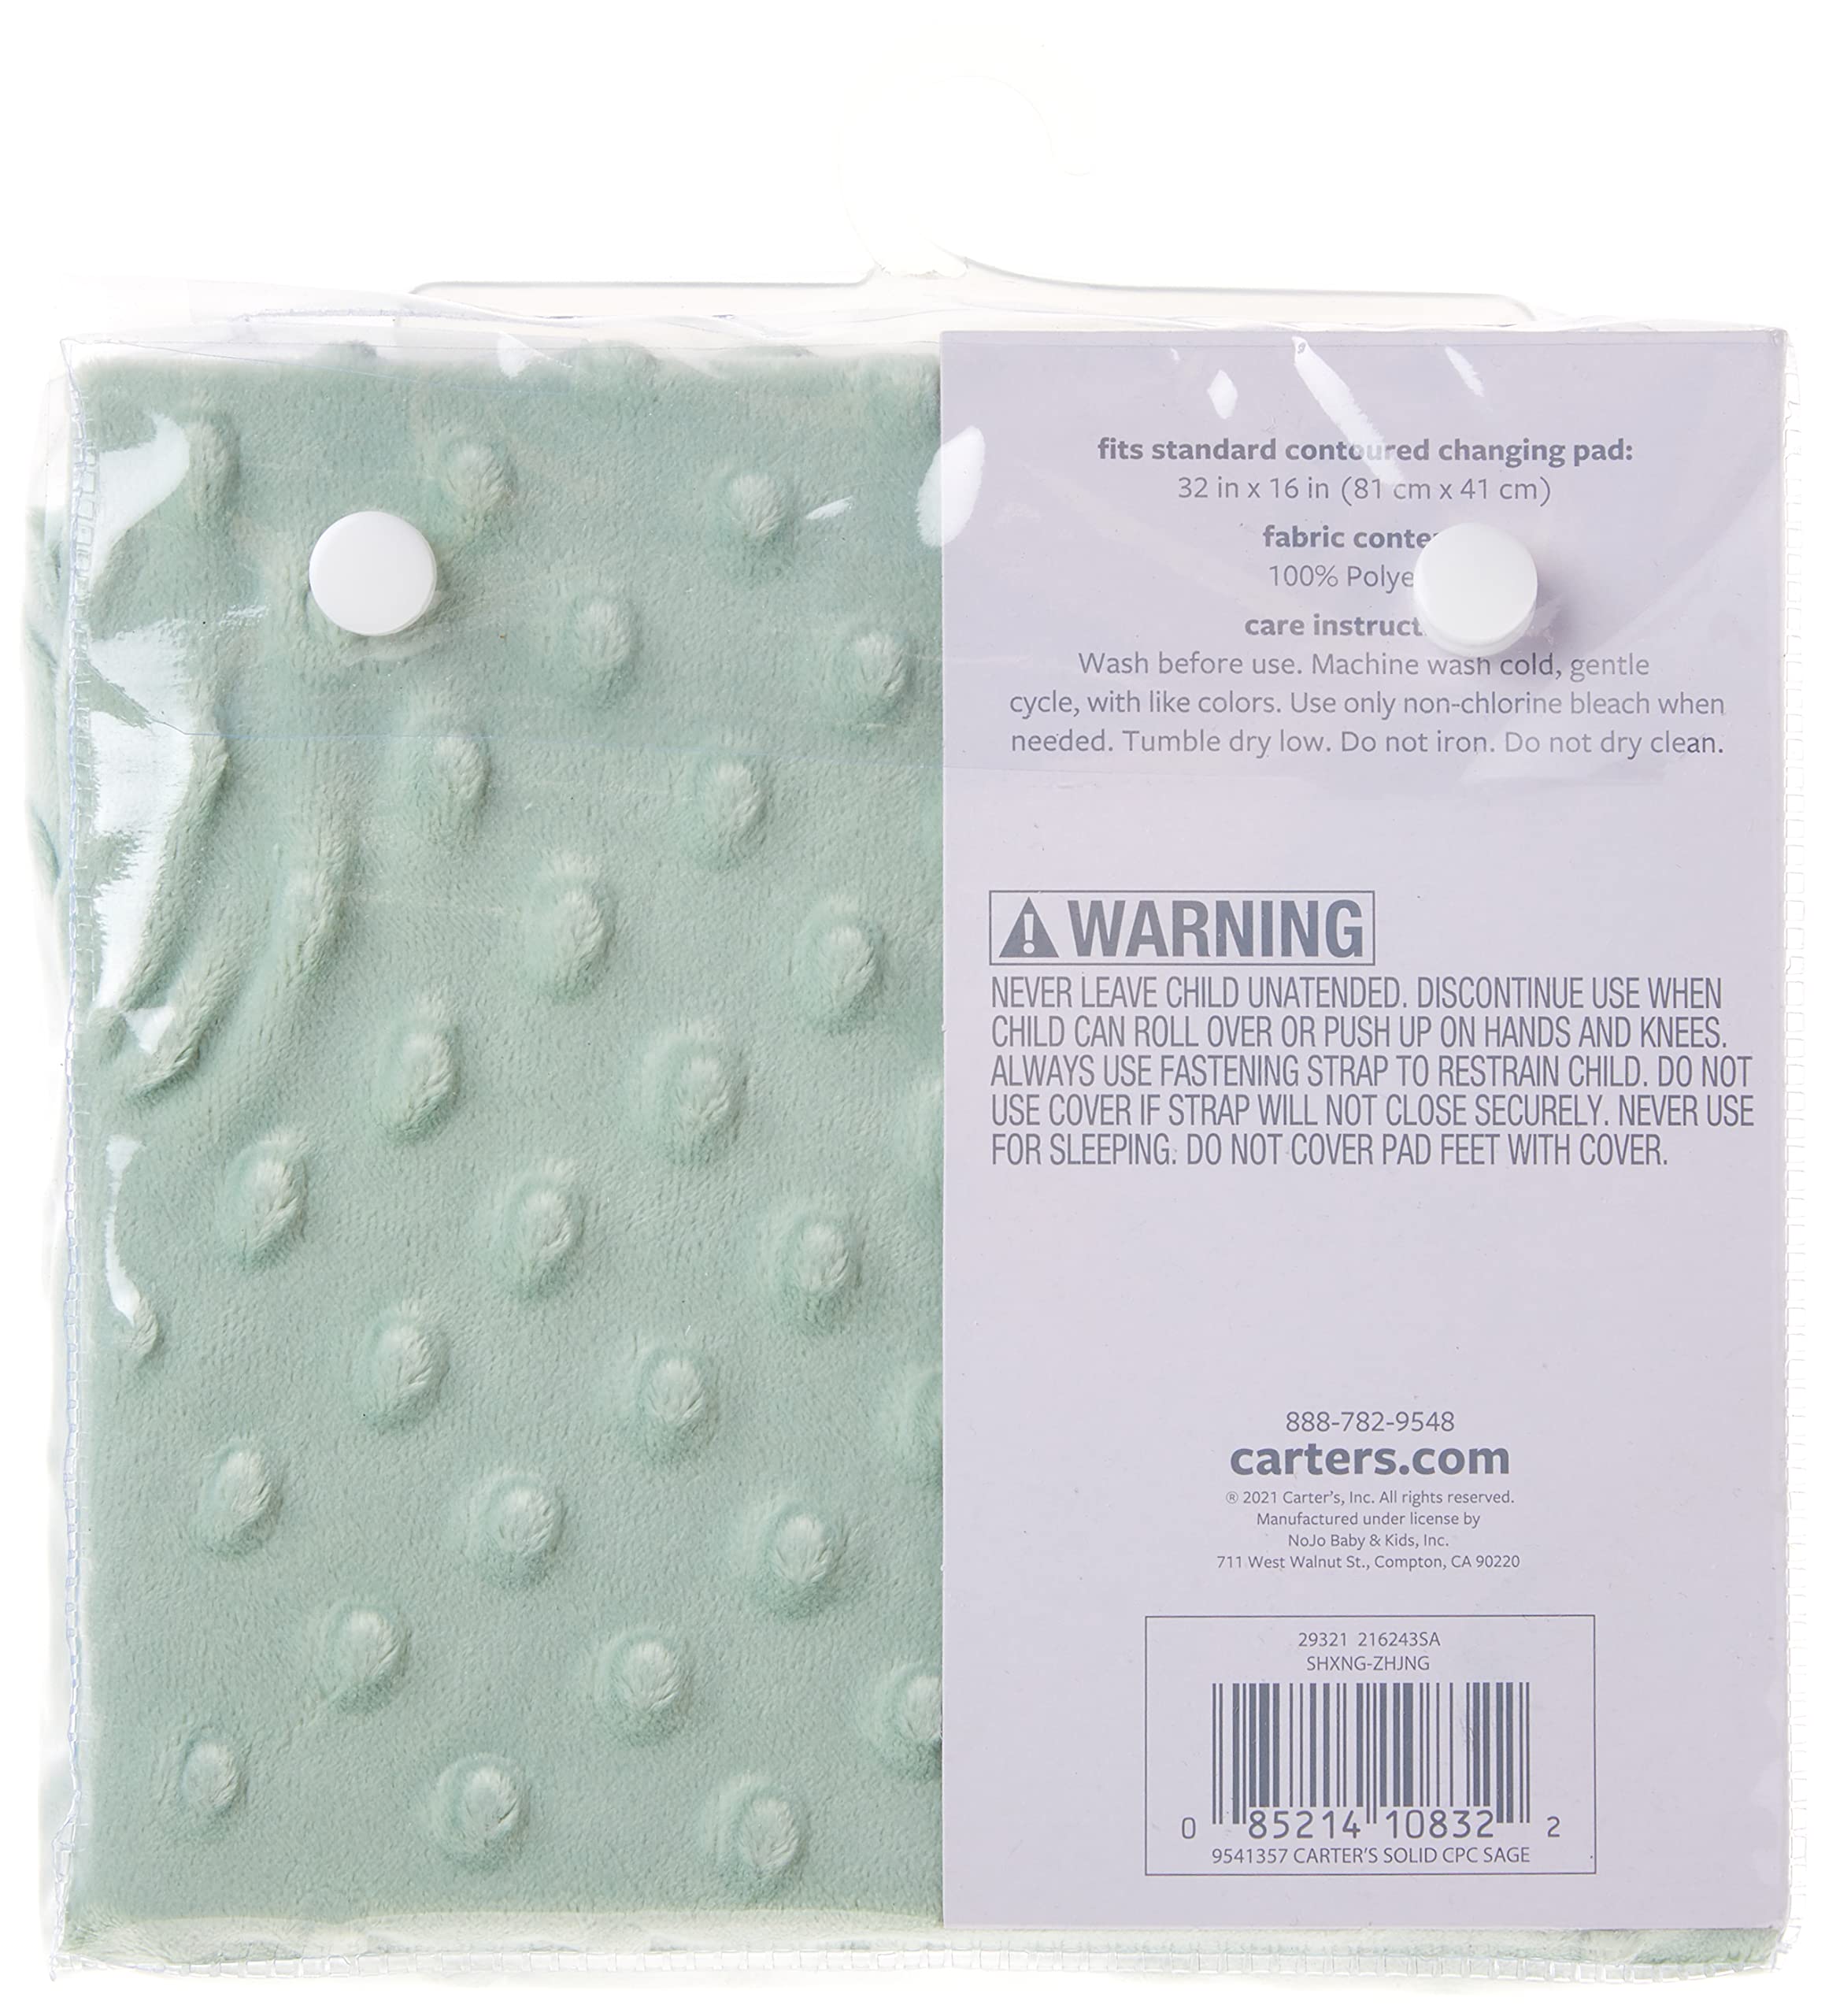 Carter's Changing Pad Cover, Solid Sage, One Size